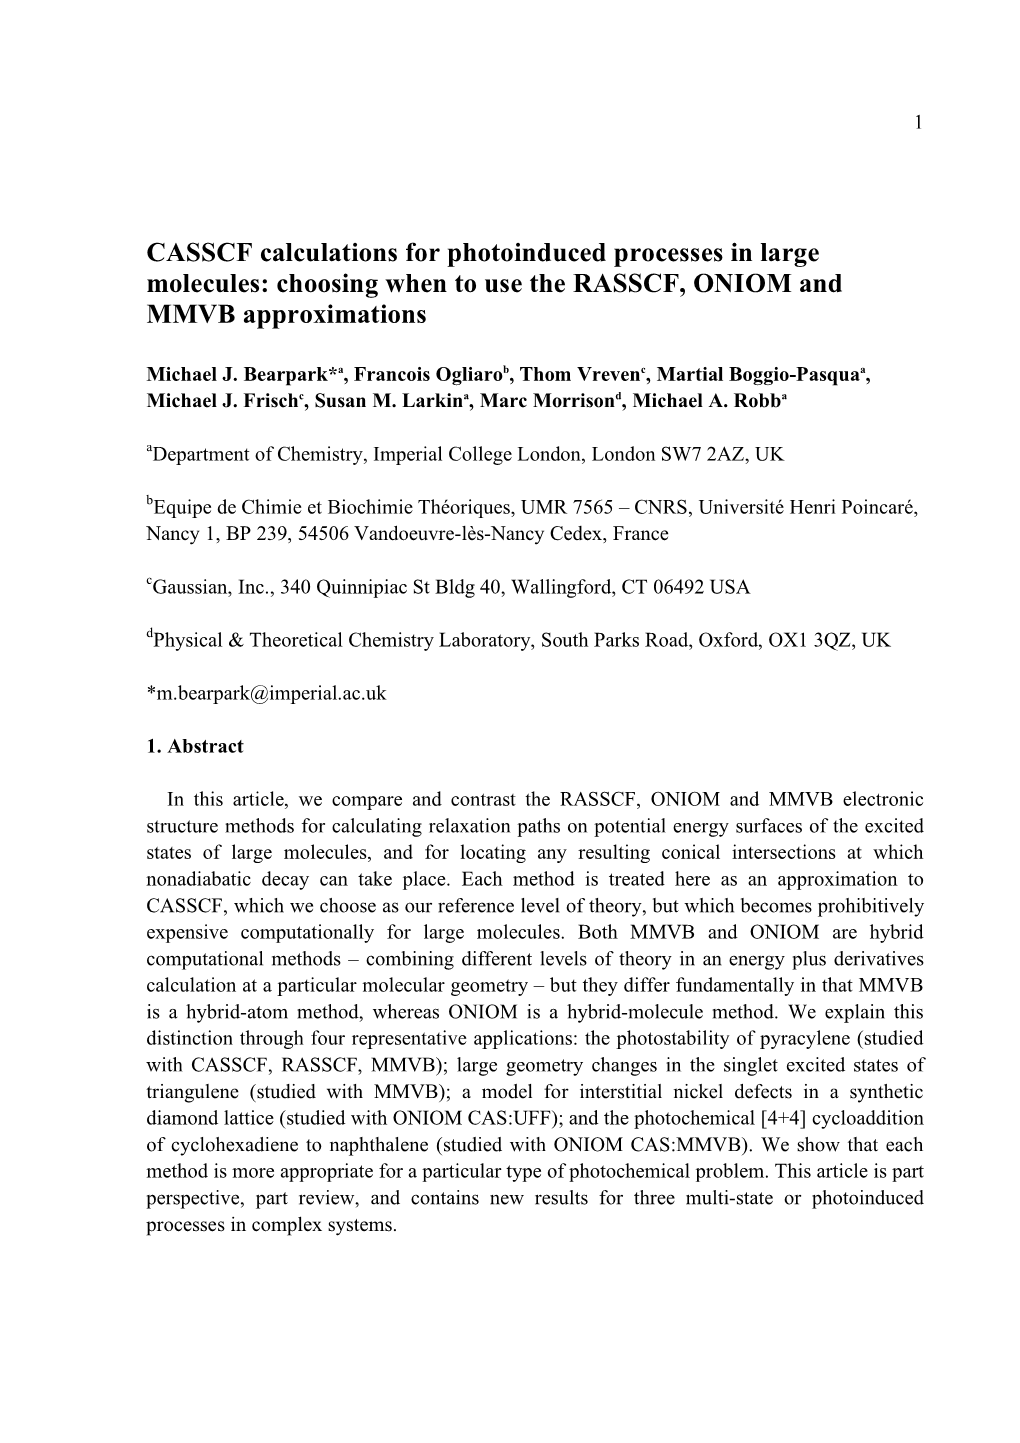 CASSCF Calculations for Photoinduced Processes in Large Molecules: Choosing When to Use the RASSCF, ONIOM and MMVB Approximations